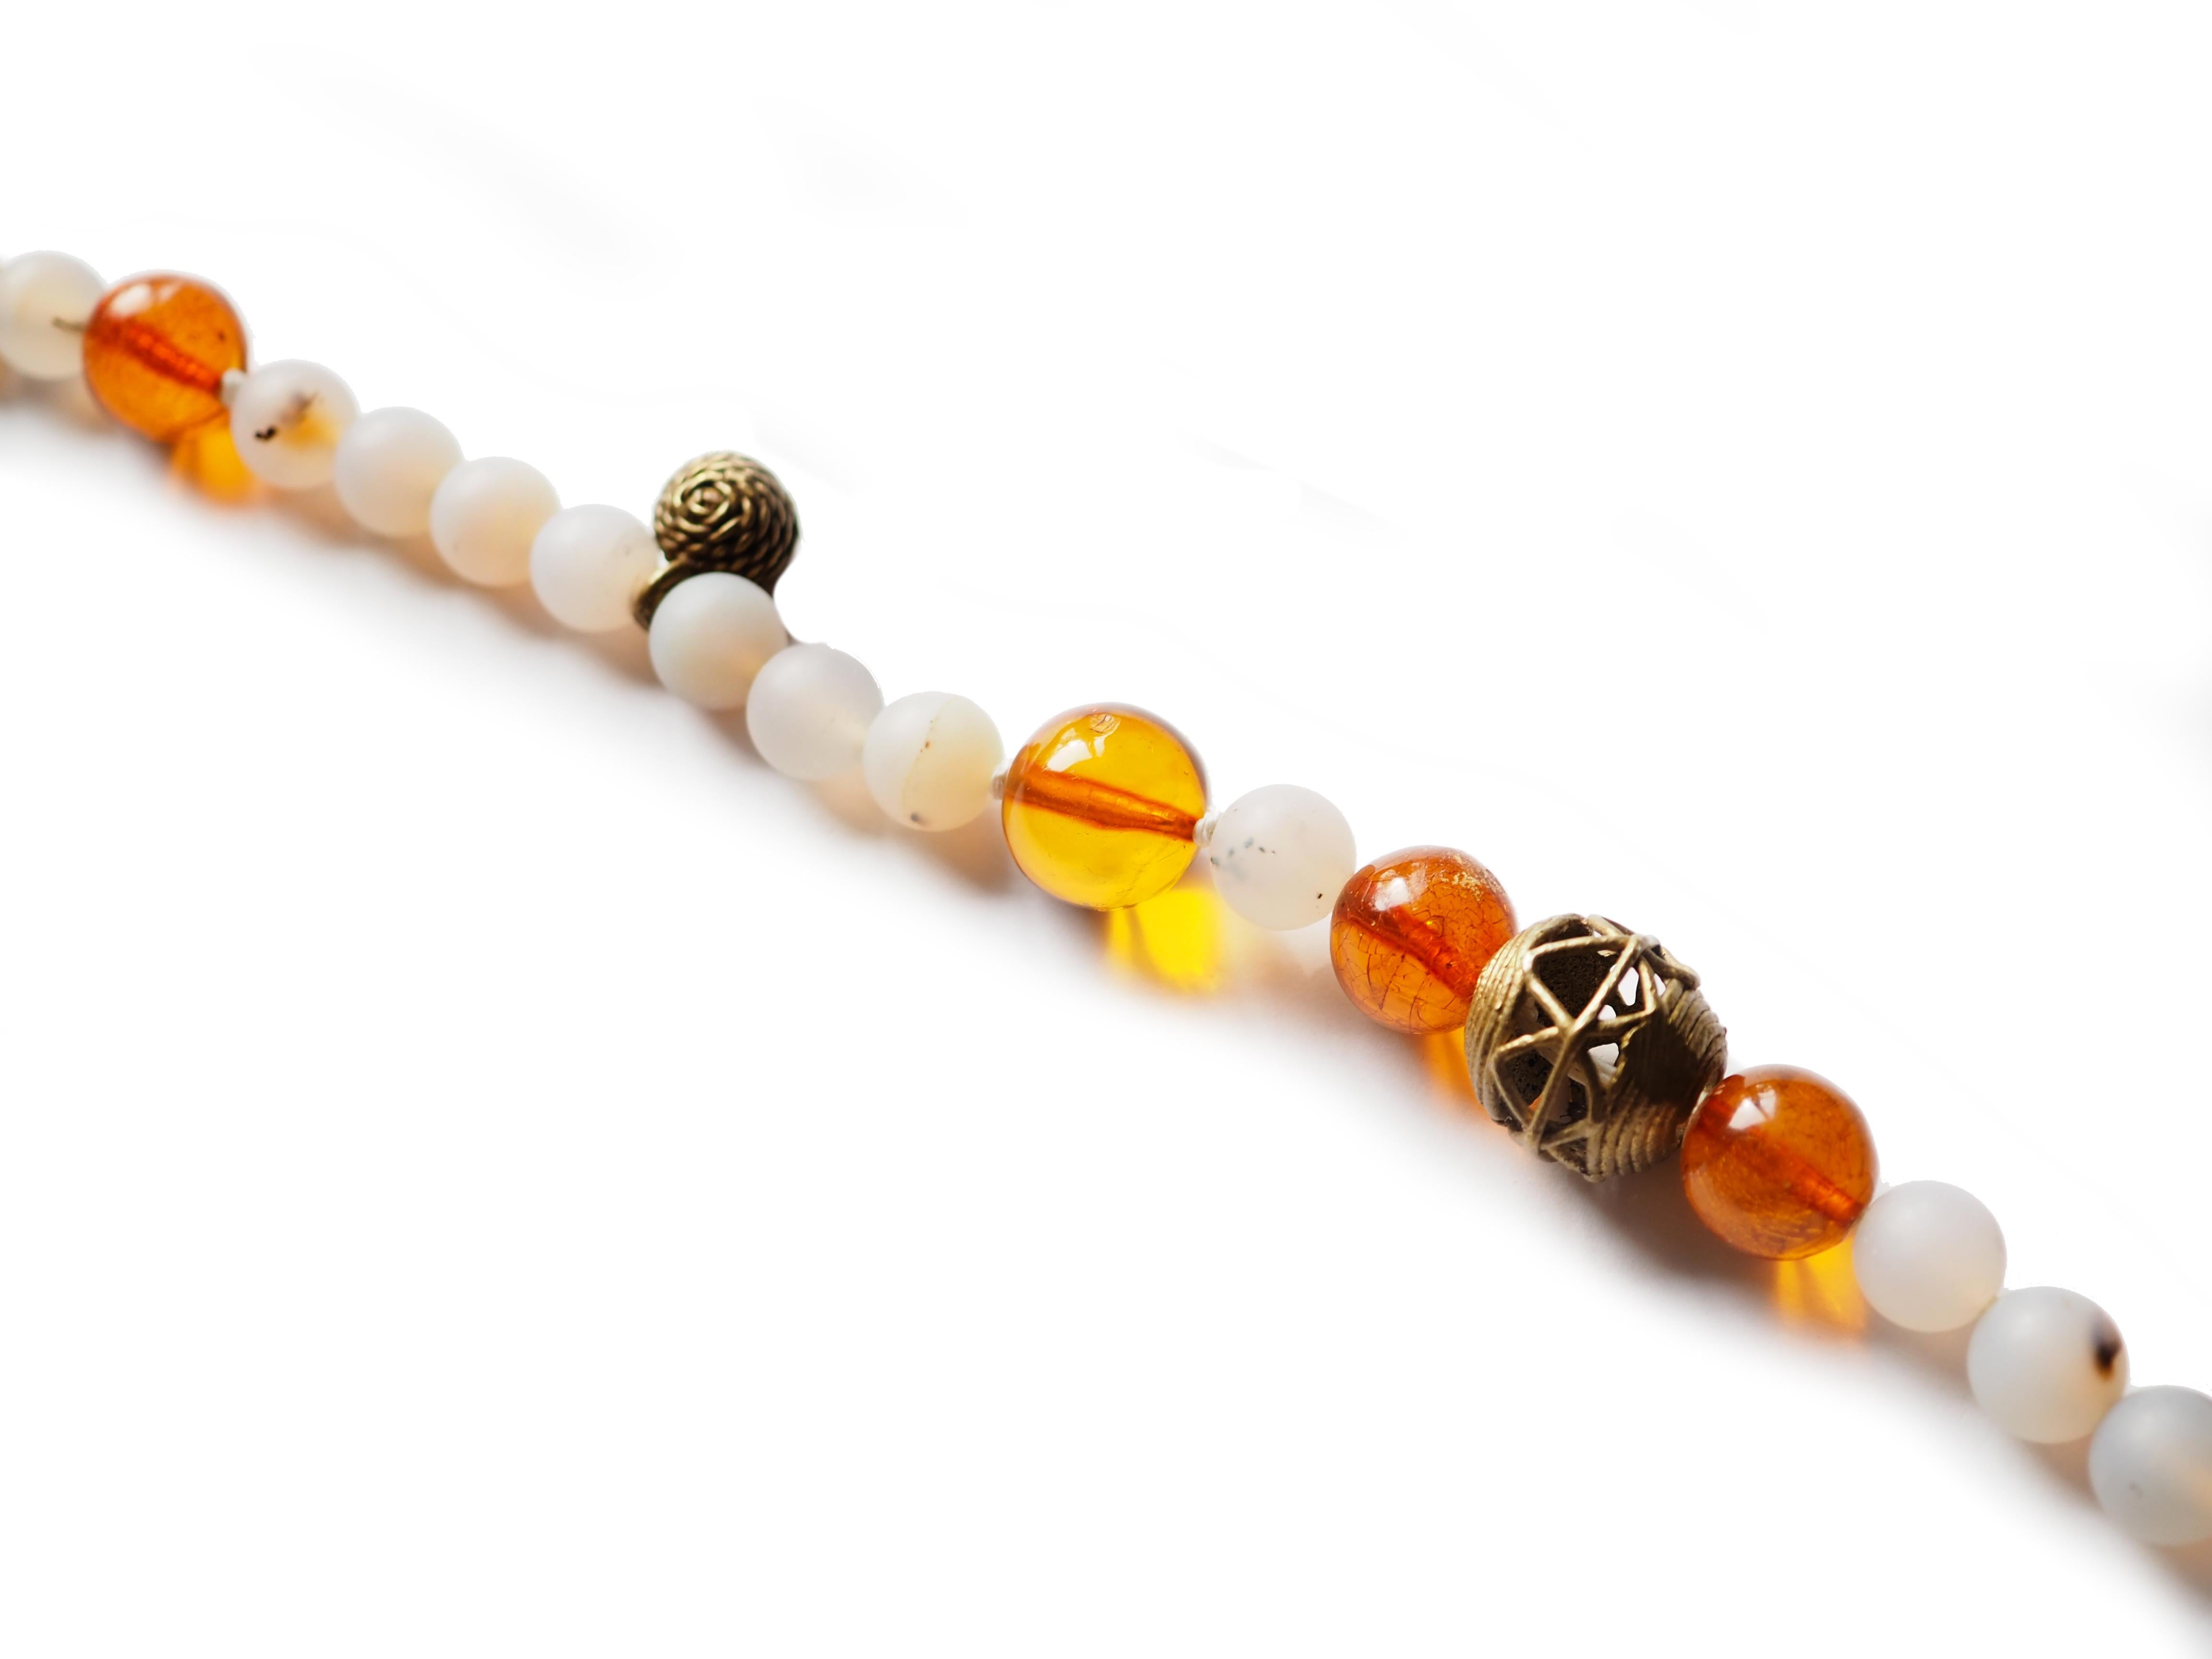 Long necklace with antique dzi agate stone antique African bronze element, amber, frozen agate bids. 80 cm long.
All Giulia Colussi jewelry is new and has never been previously owned or worn. Each item will arrive at your door beautifully gift